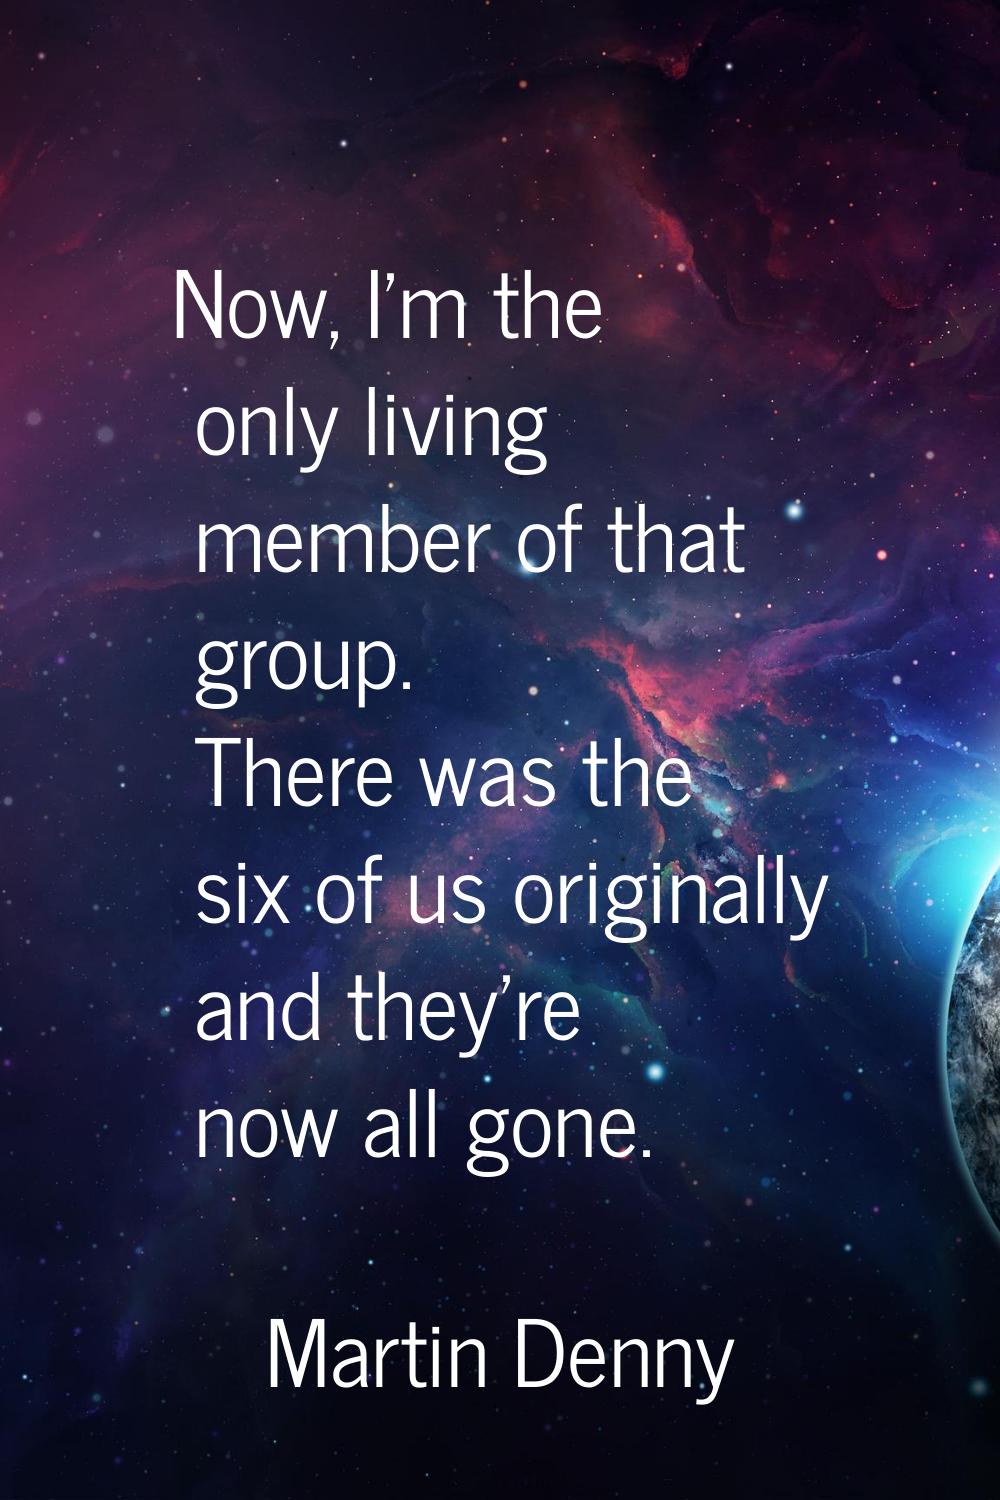 Now, I'm the only living member of that group. There was the six of us originally and they're now a